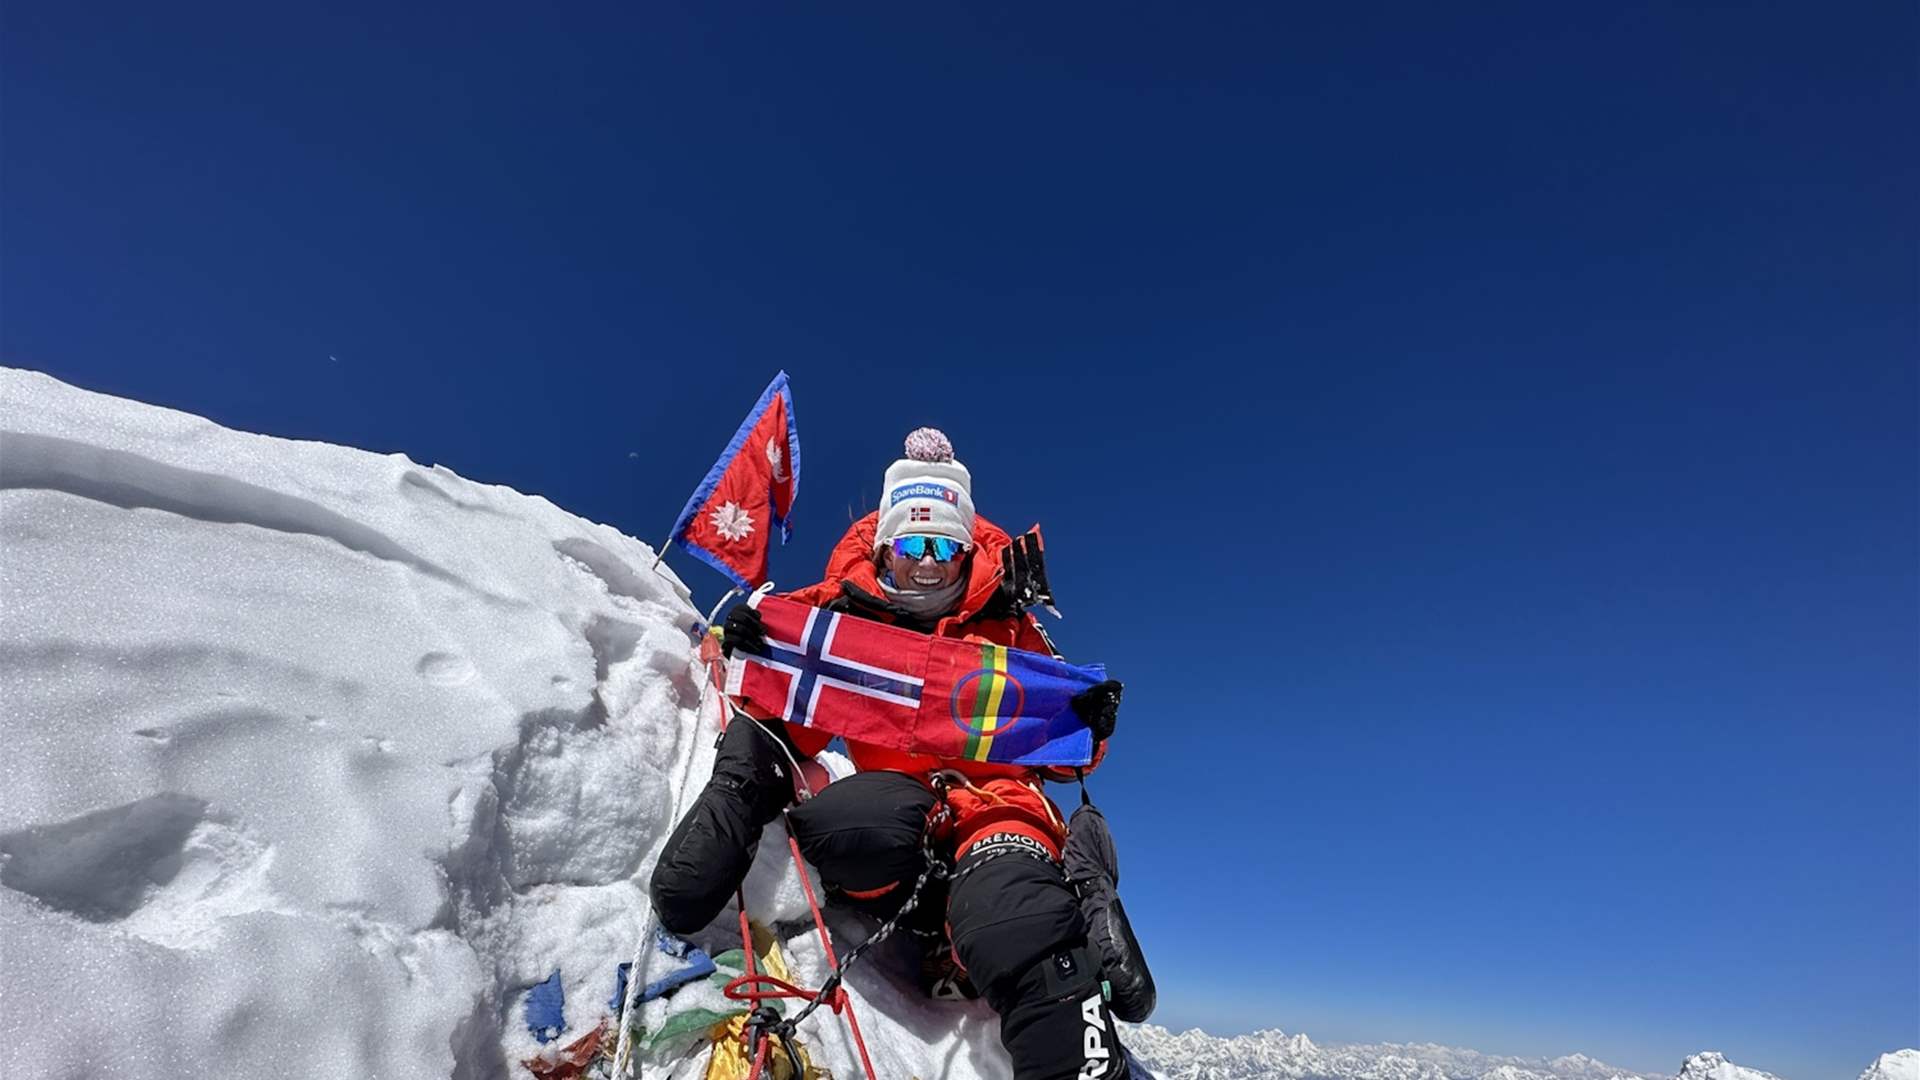 Norwegian climber her Nepali guide break world record, conquering 14 peaks above 8,000 meters 